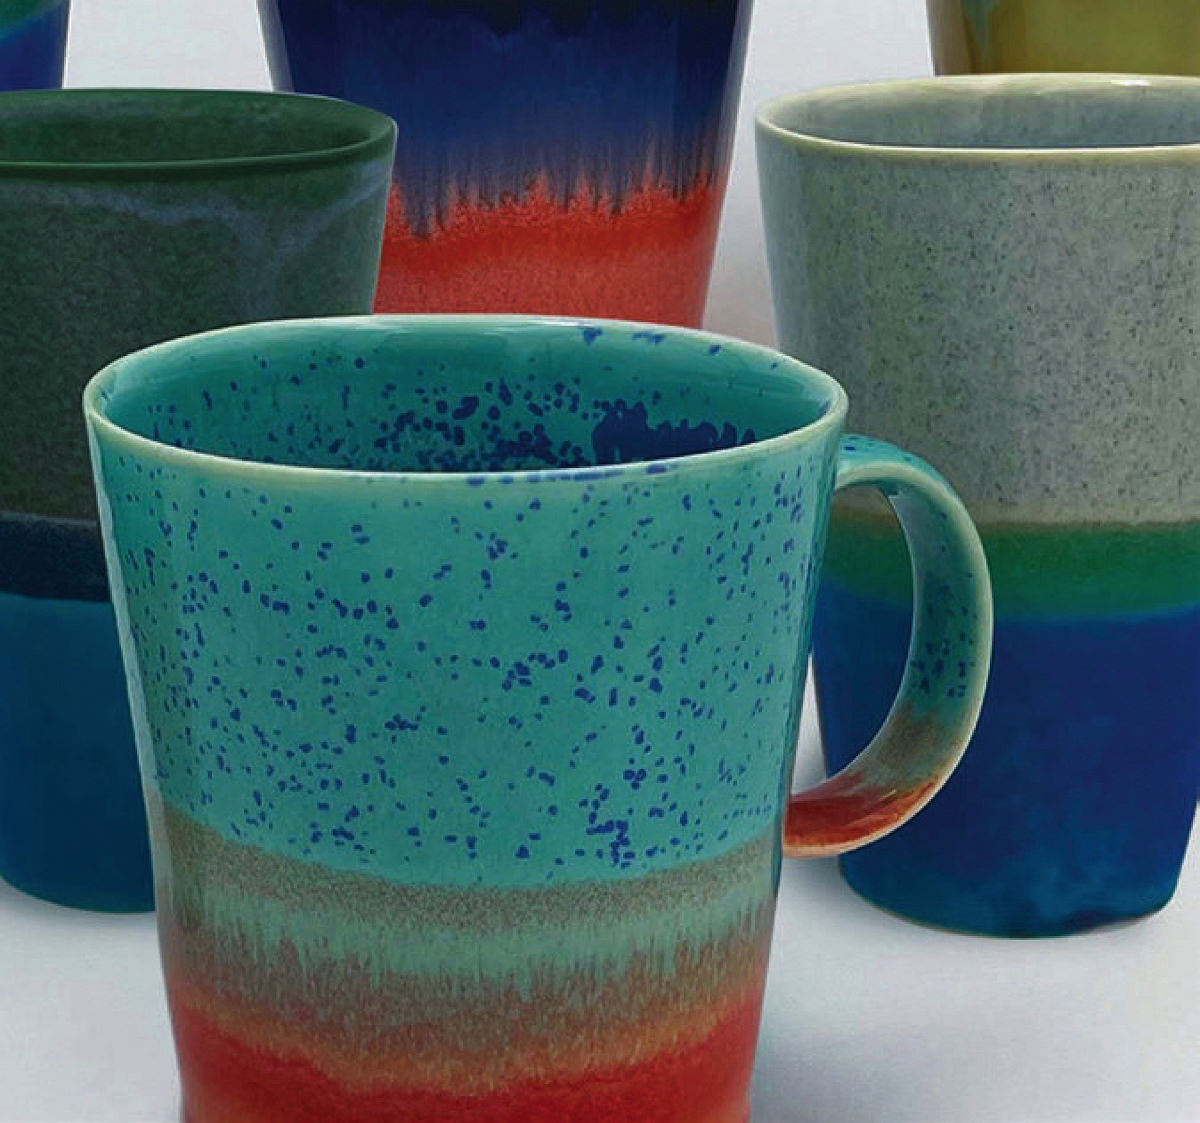 Mugs of different colors